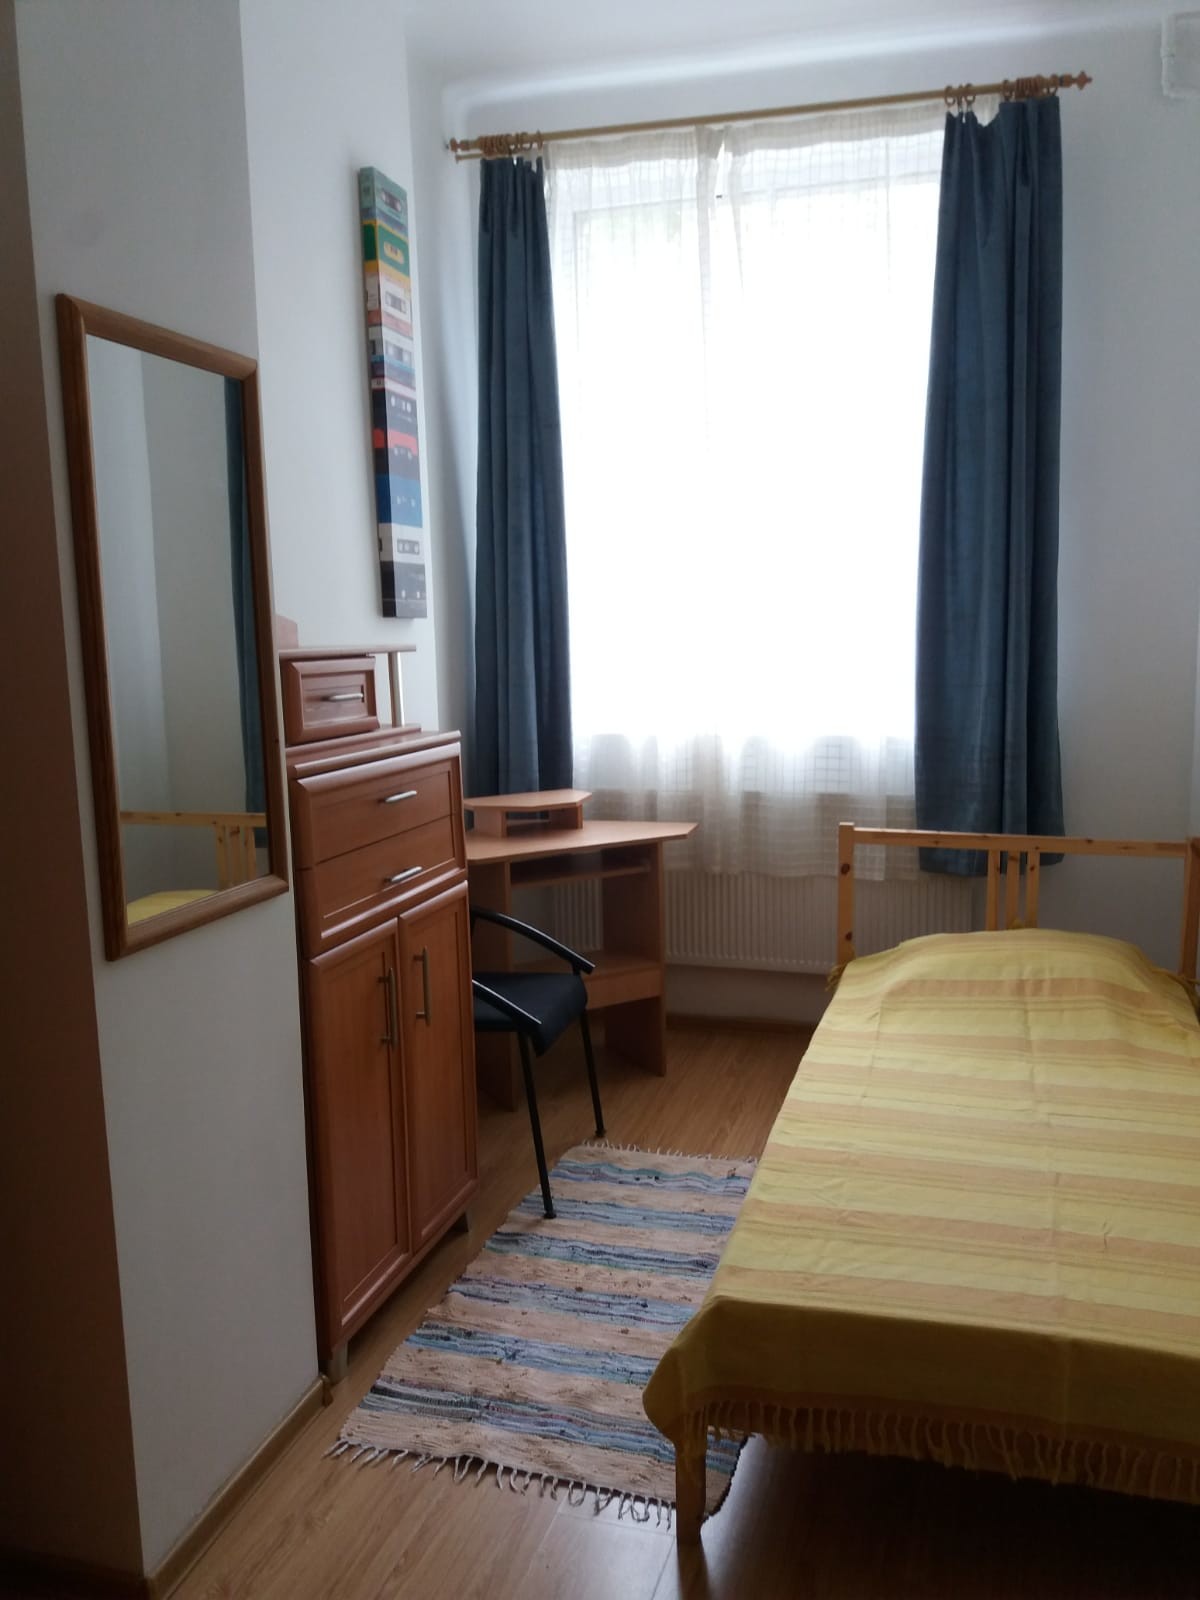 We are looking for a flatmate to share an apartment in the Vilnius Old ...